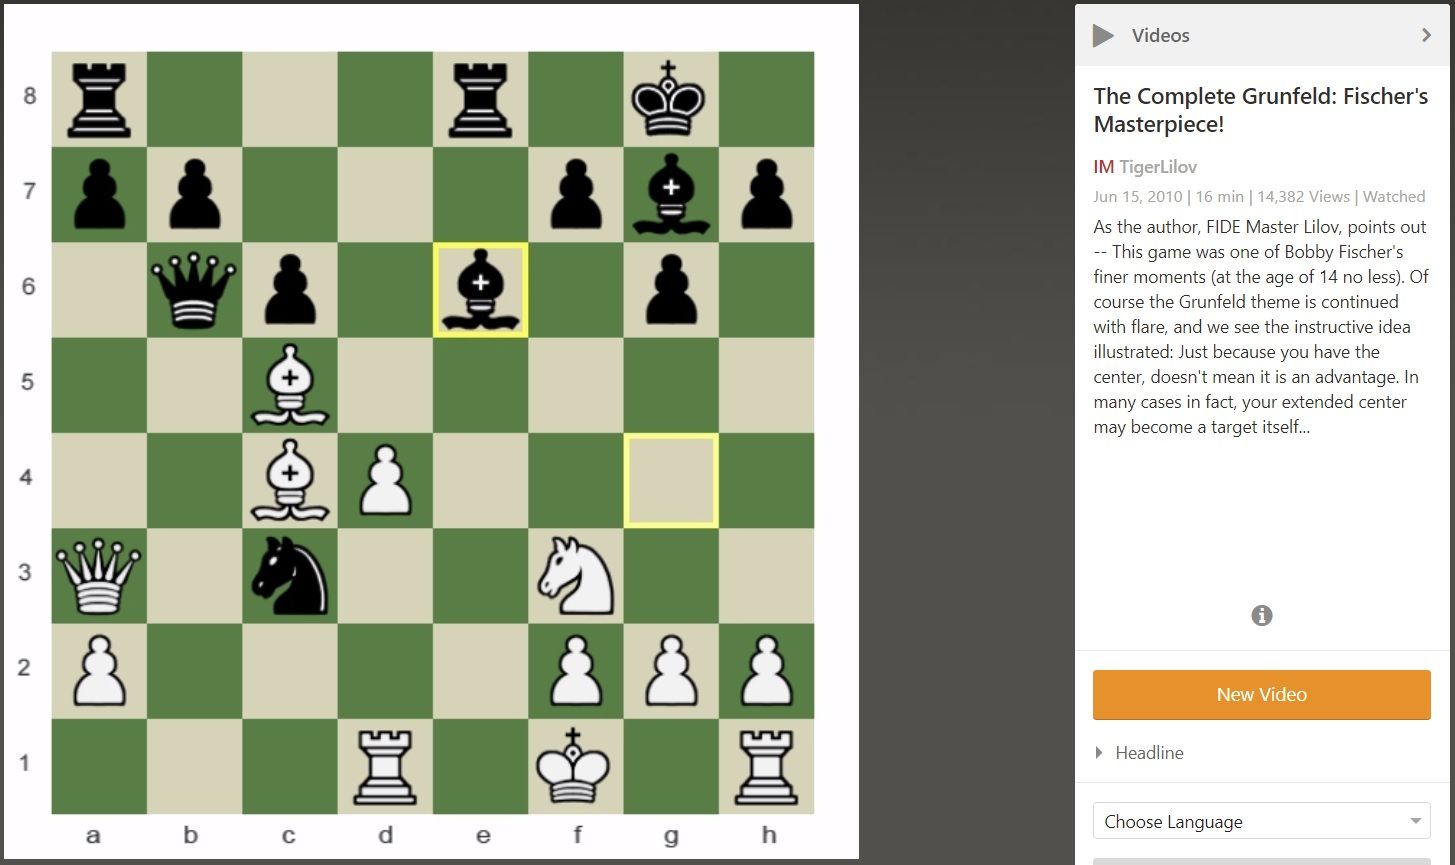 I had the (basic) computer analyze Fischer's Game of Century. The